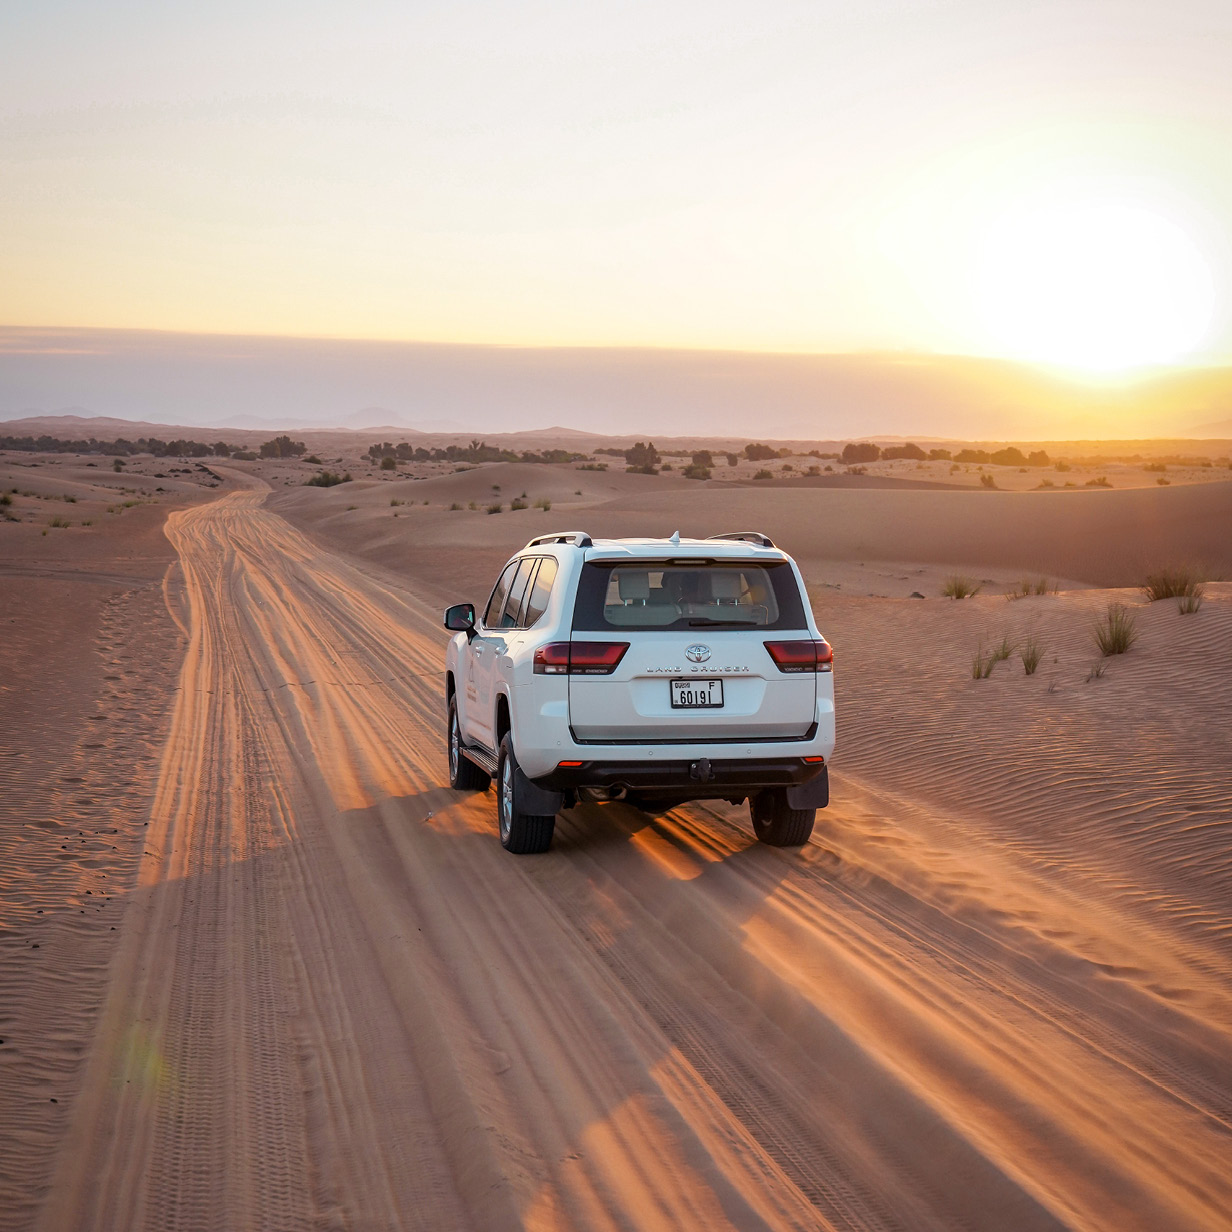 Evening Dune Drive in Dubai - Private Vehicle, , large